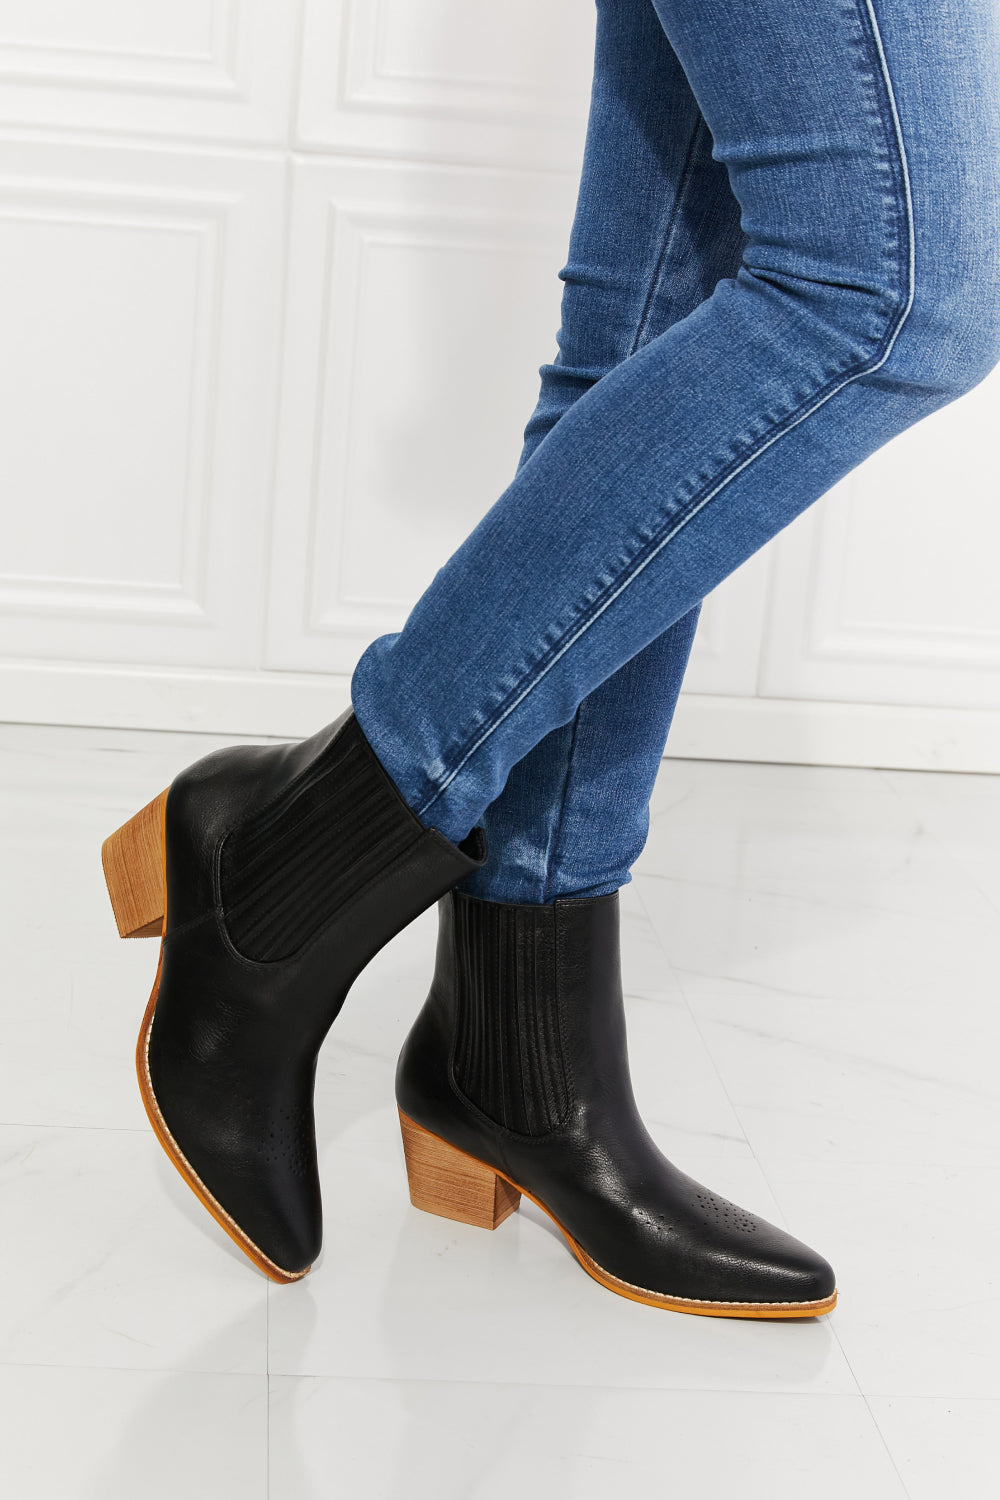 Love the Journey Stacked Heel Chelsea Boot in Black - Copper + Rose